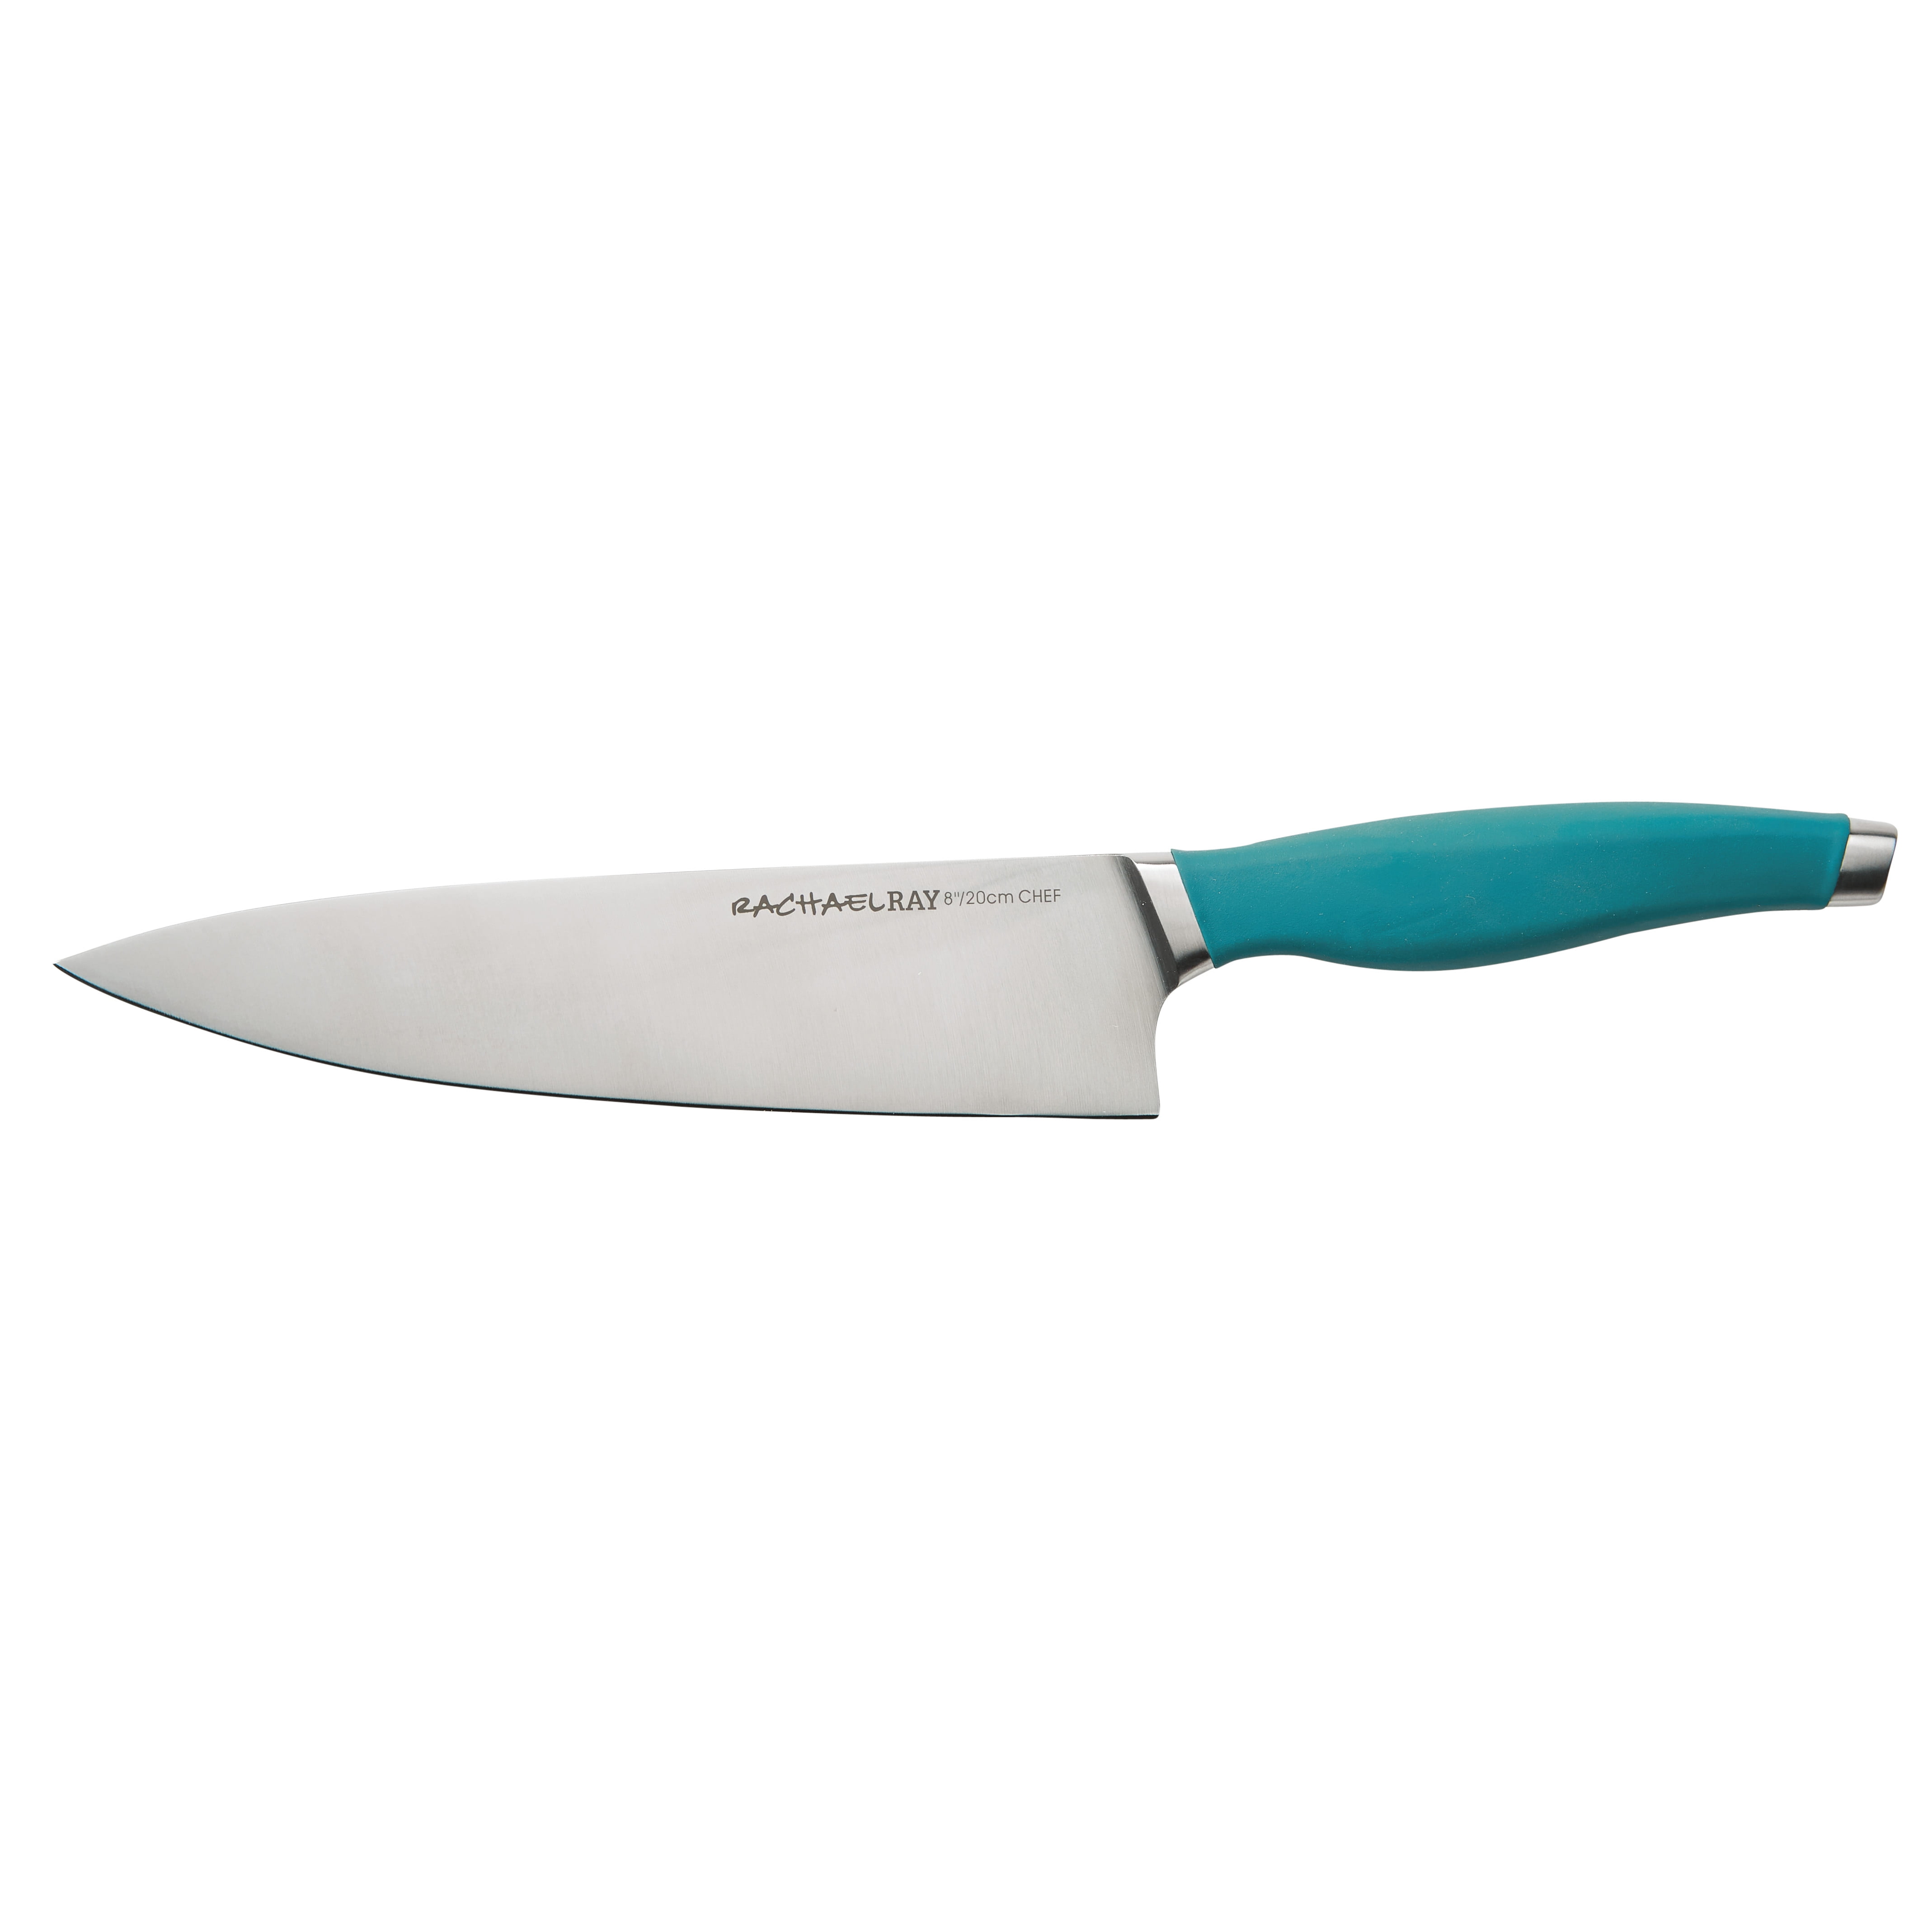 Online Deals – Rachael Ray Knife sets on sale as low as $9.99 with